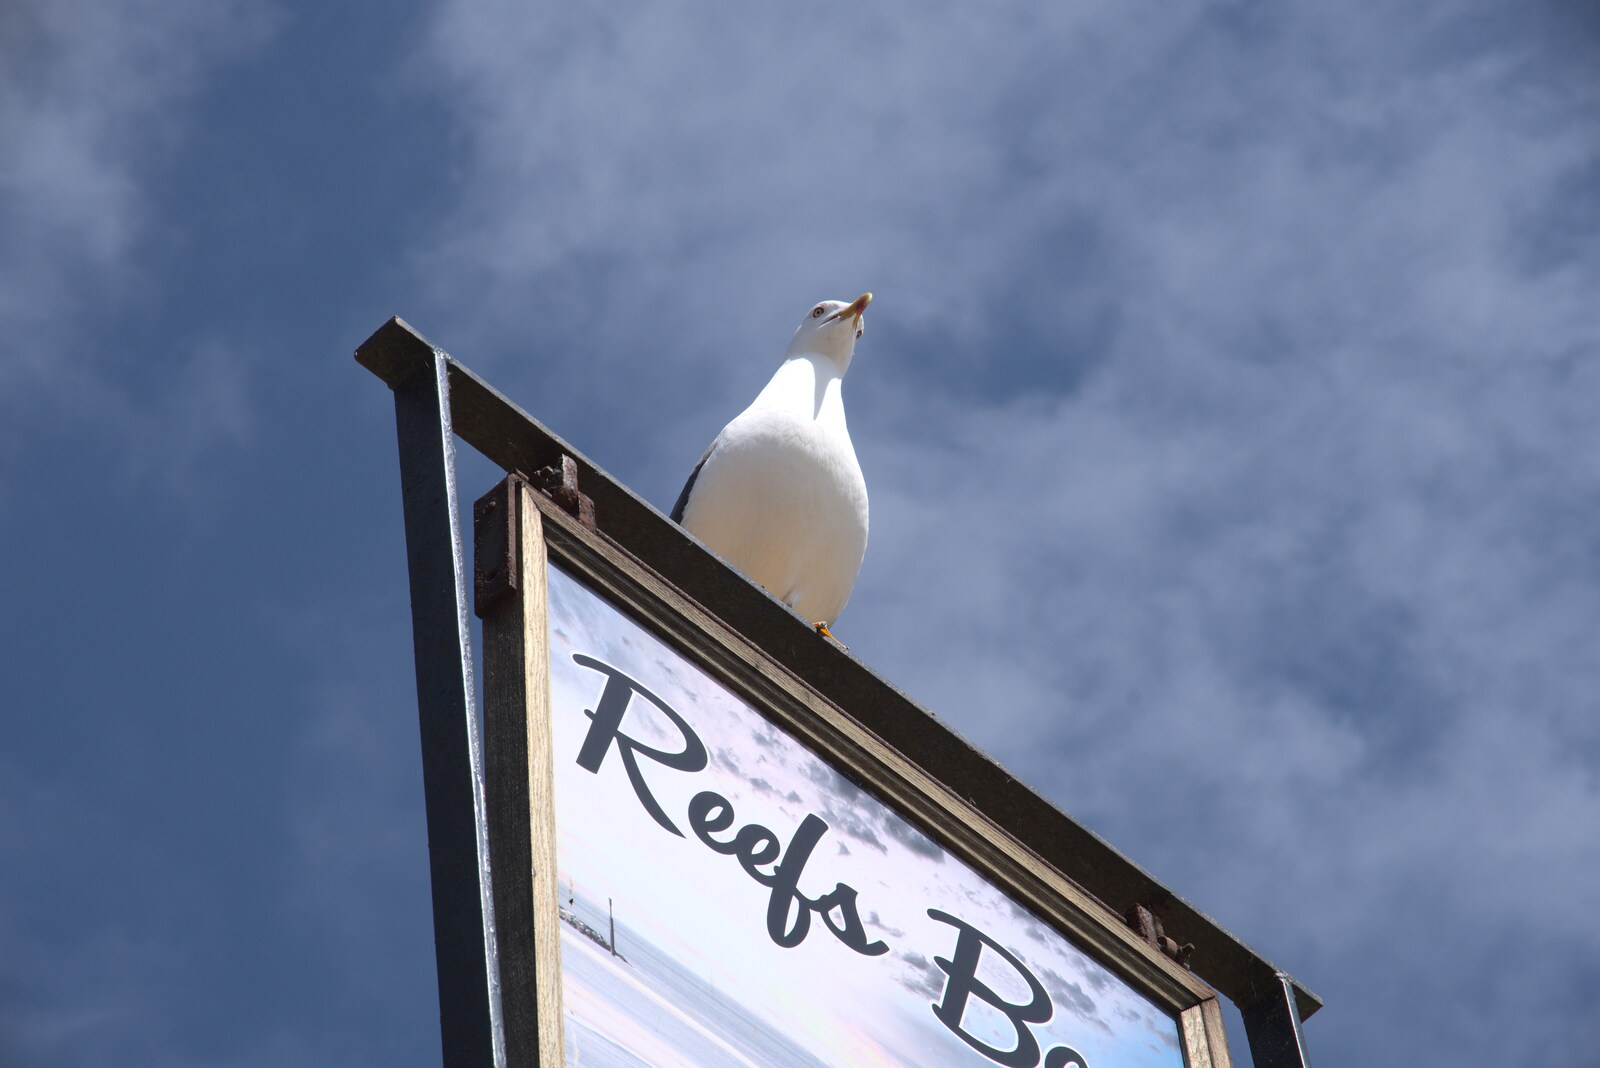 A herring gull surveys the scene from a sign from On the Beach at Sea Palling, Norfolk - 8th May 2022